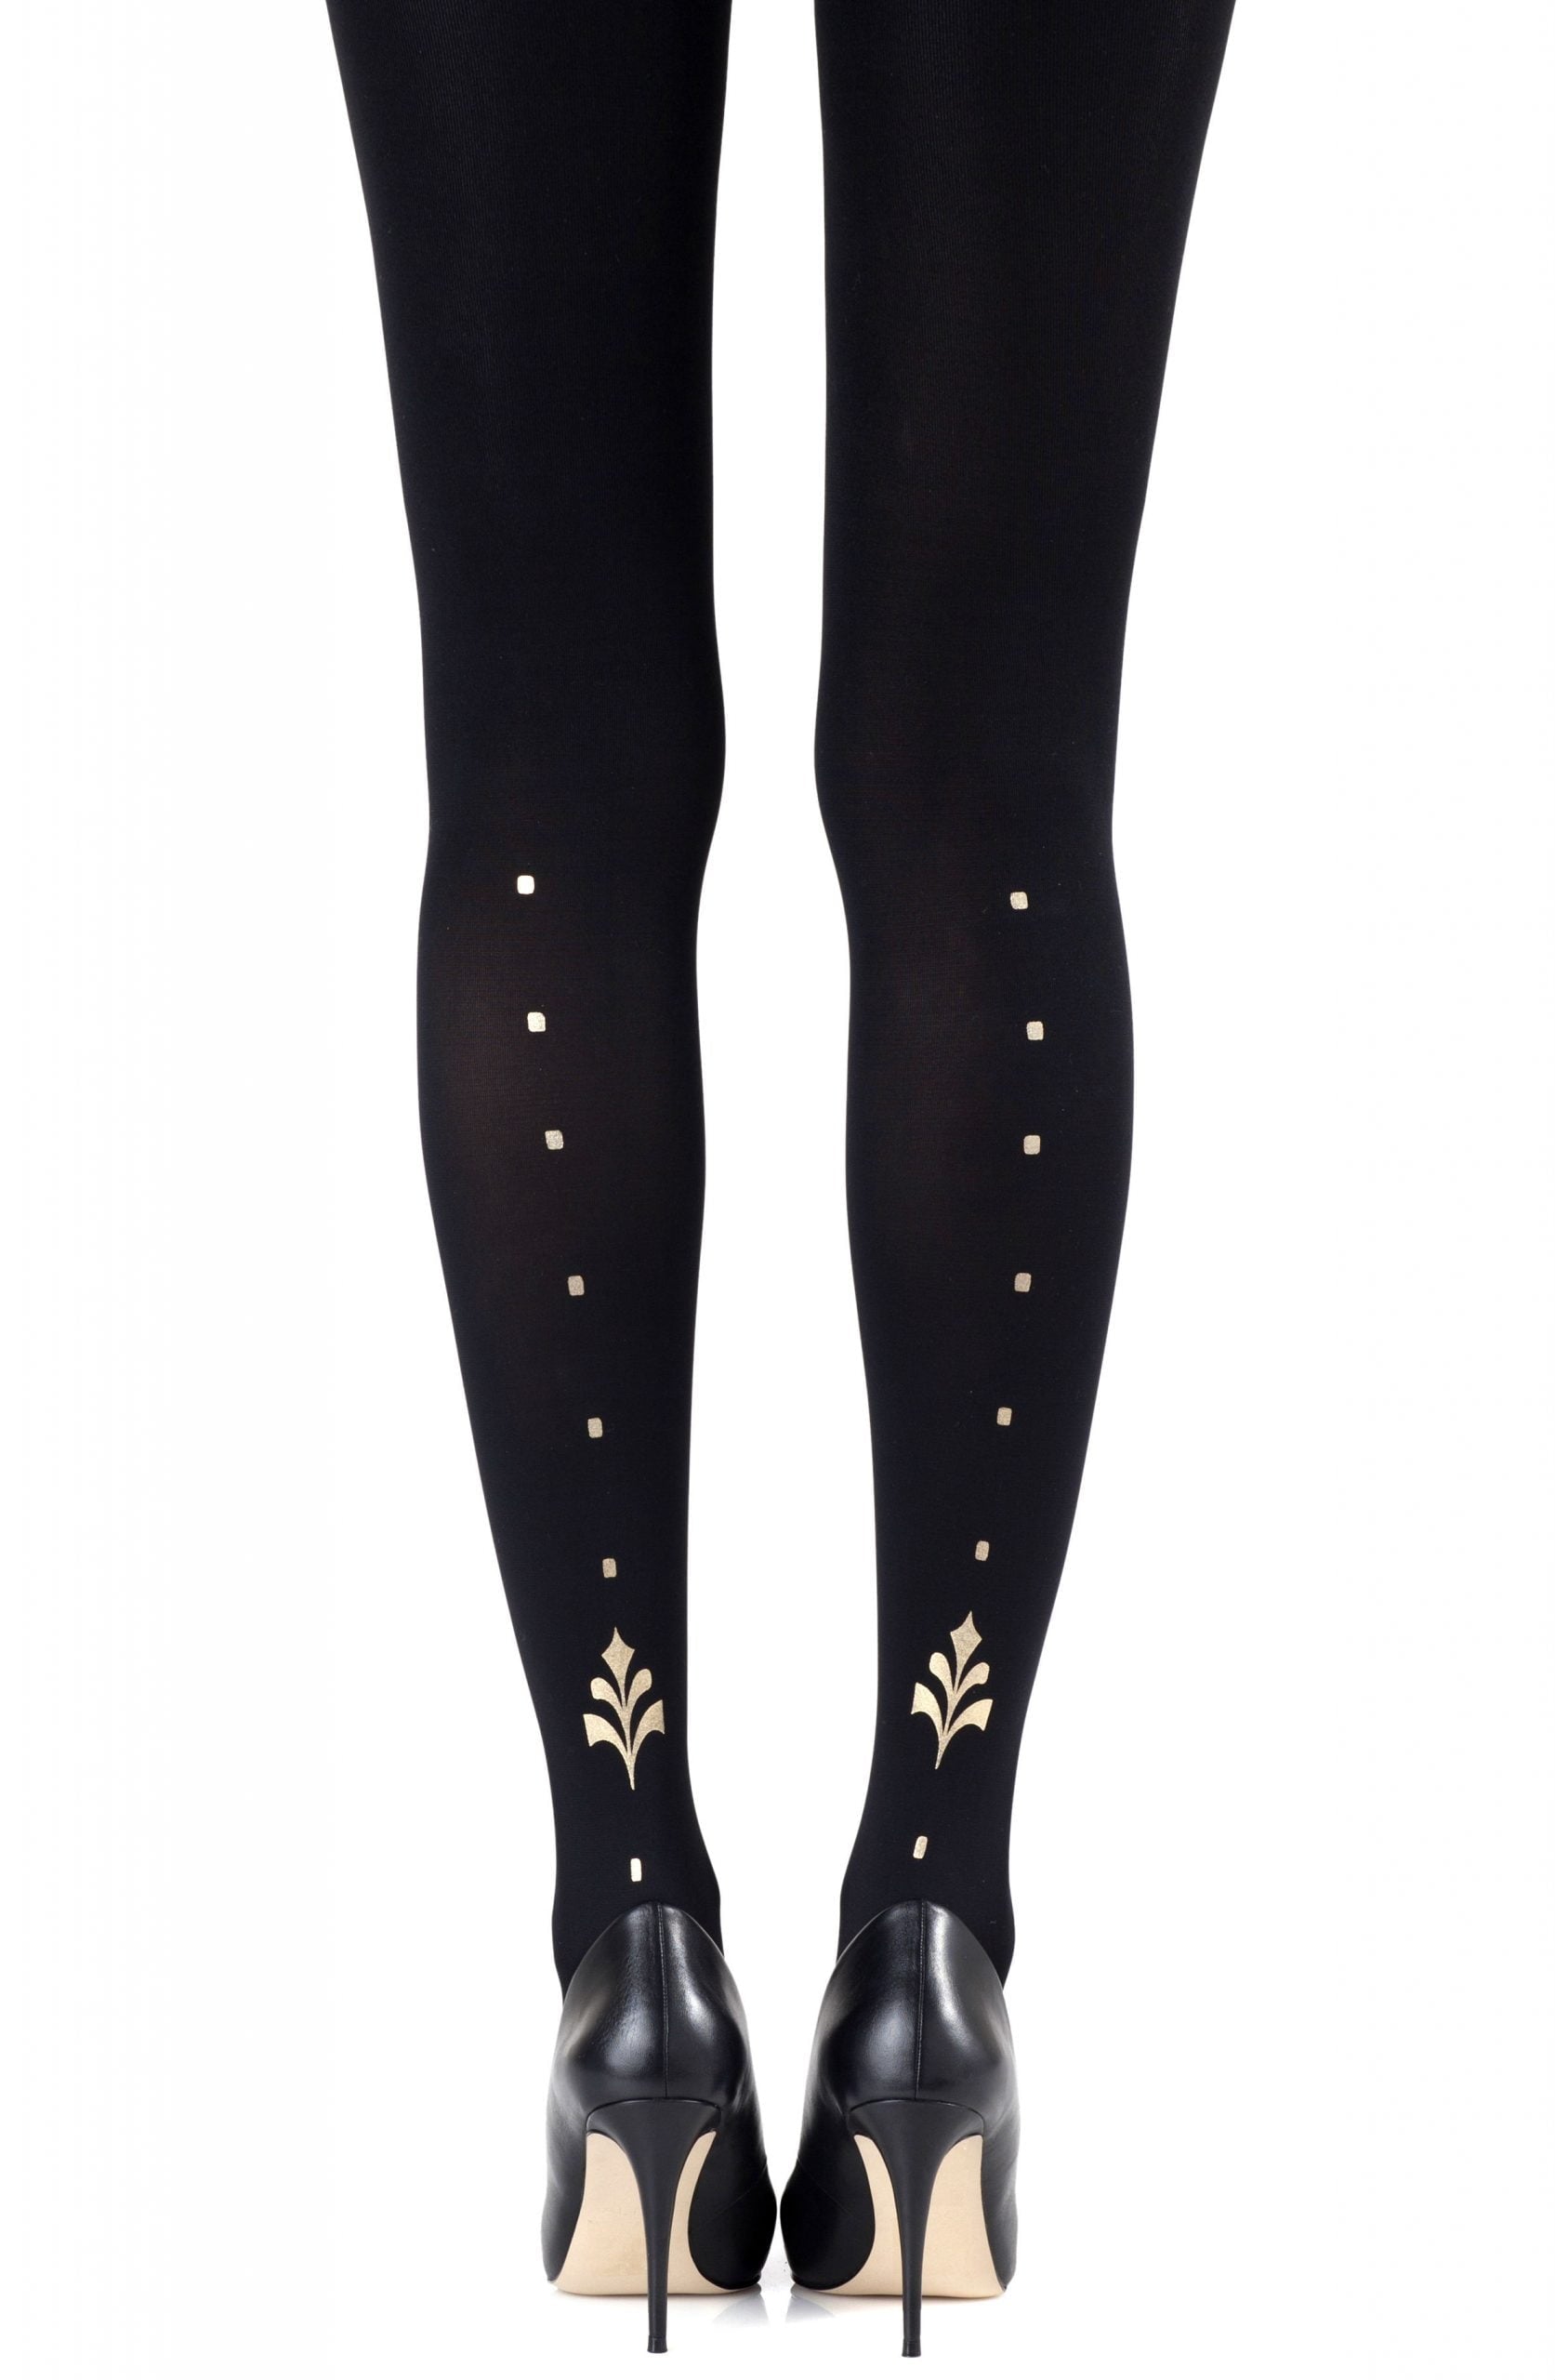 Vibrators, Sex Toy Kits and Sex Toys at Cloud9Adults - Zohara "Dot Calm" Gold Print Tights - Buy Sex Toys Online